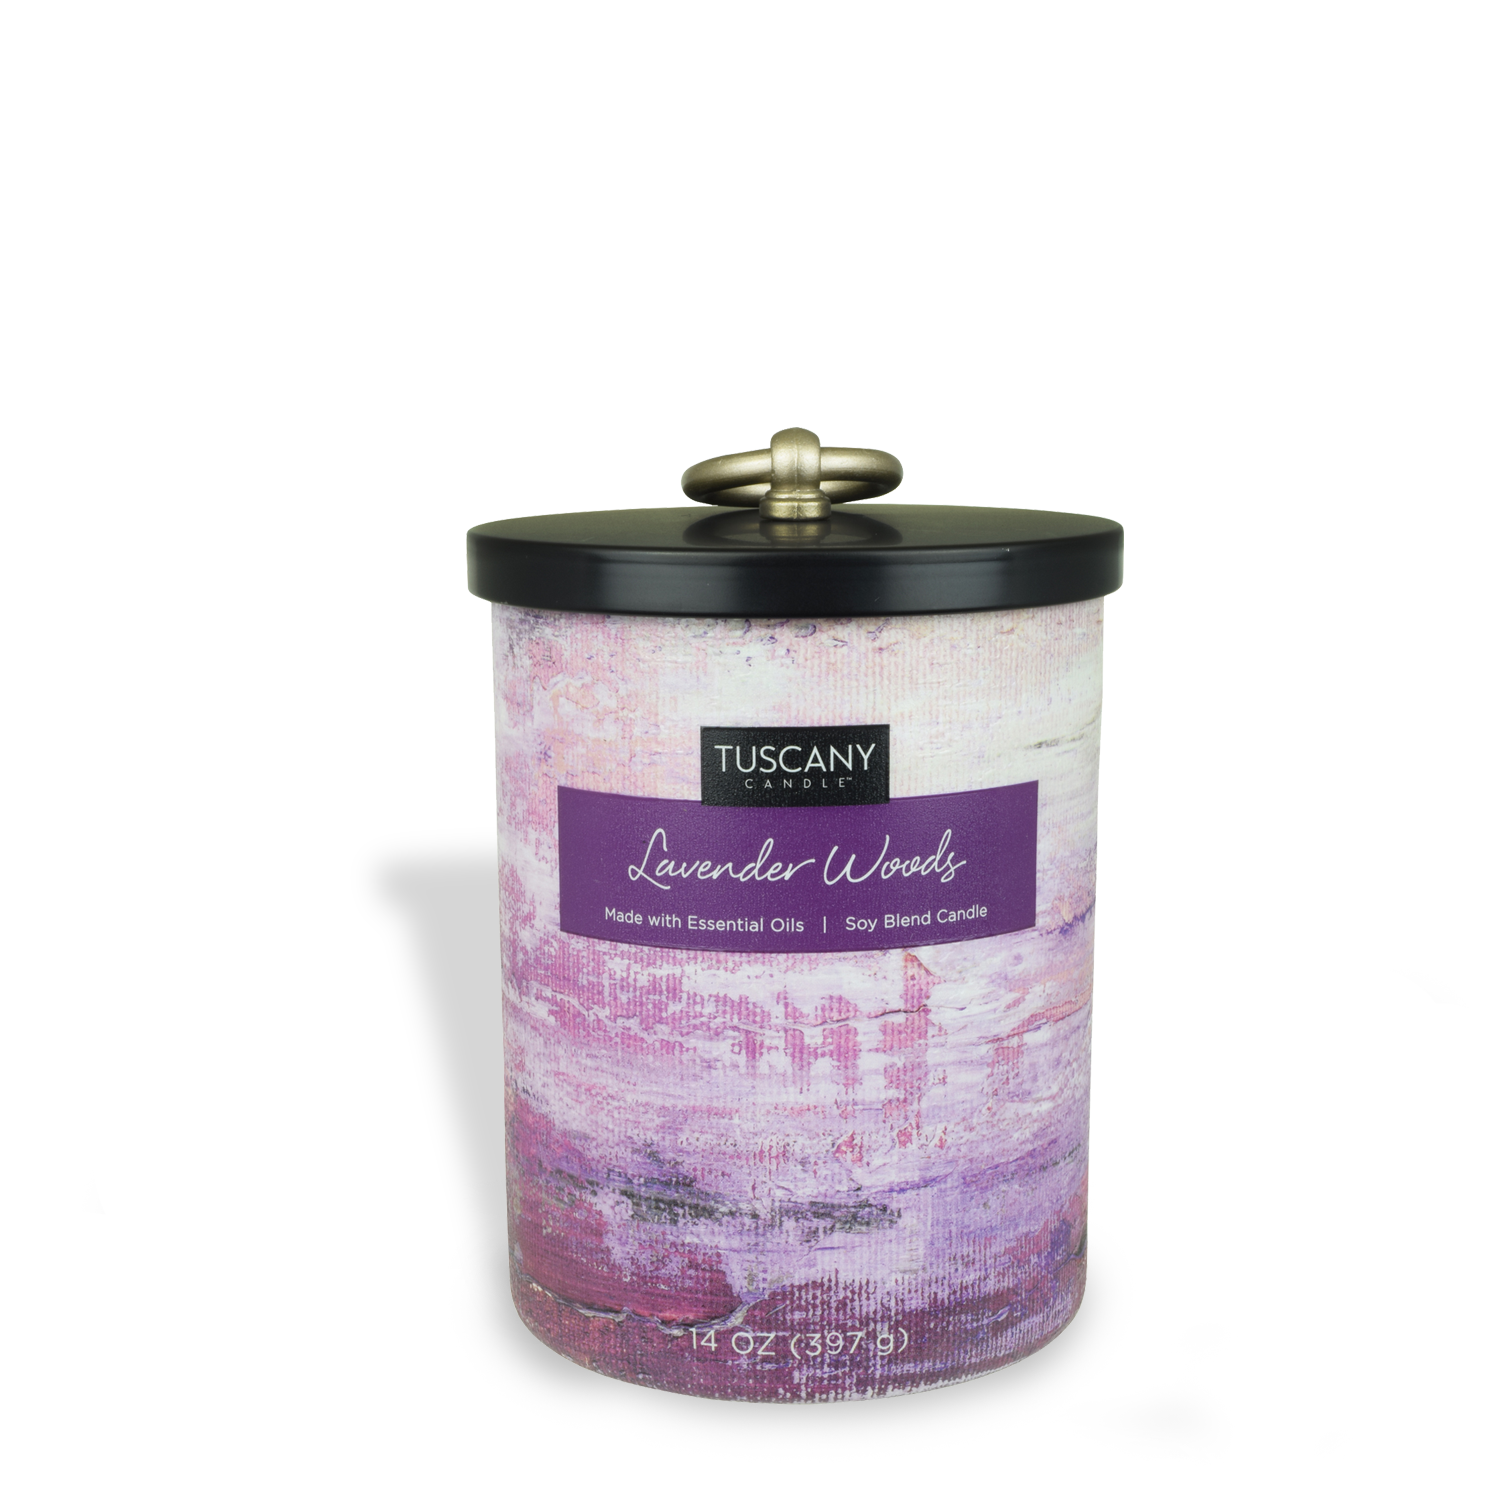 A Tuscany Candle tin with a lid, containing Lavender Woods Scented Jar Candle (14 oz) on it. Suitable for essential oils or as a decorative home décor item.